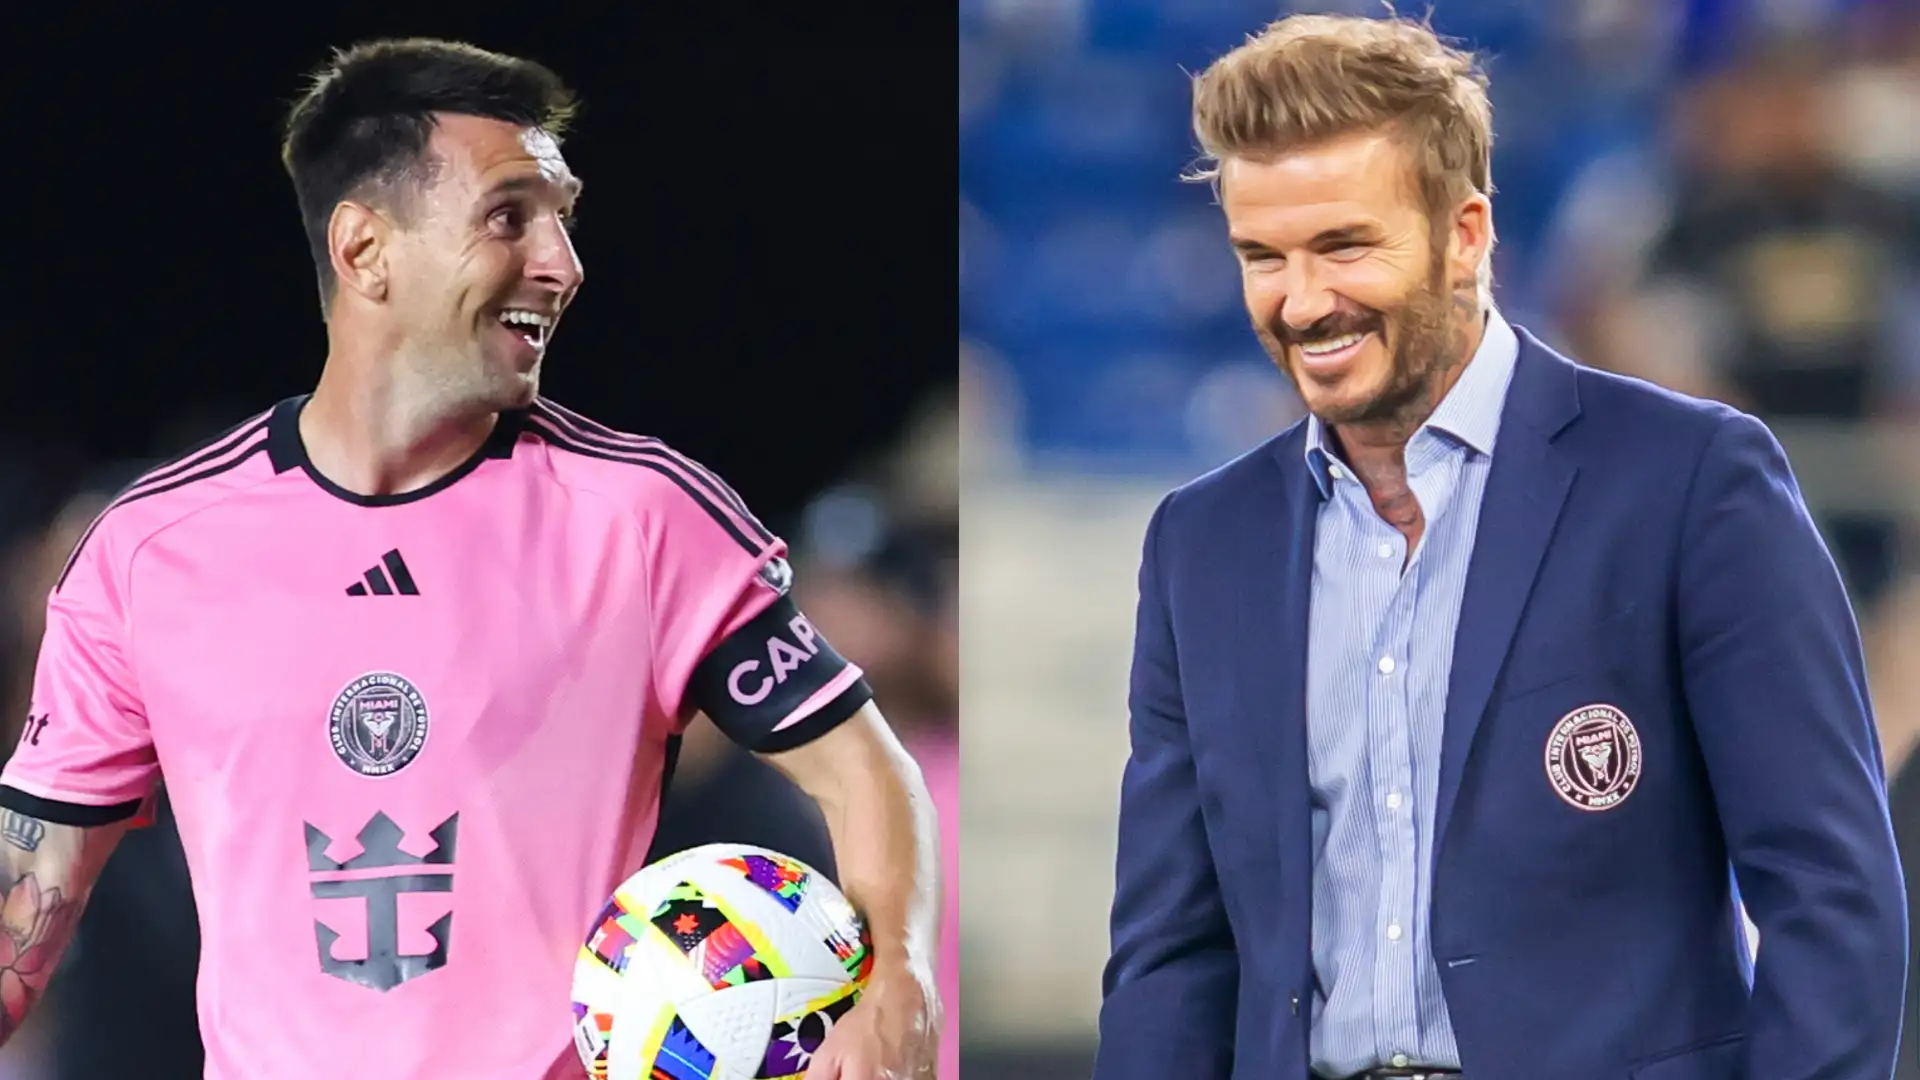 'To the greatest' - Lionel Messi shows off enormous birthday present from David Beckham as Inter Miami superstar celebrates turning 37